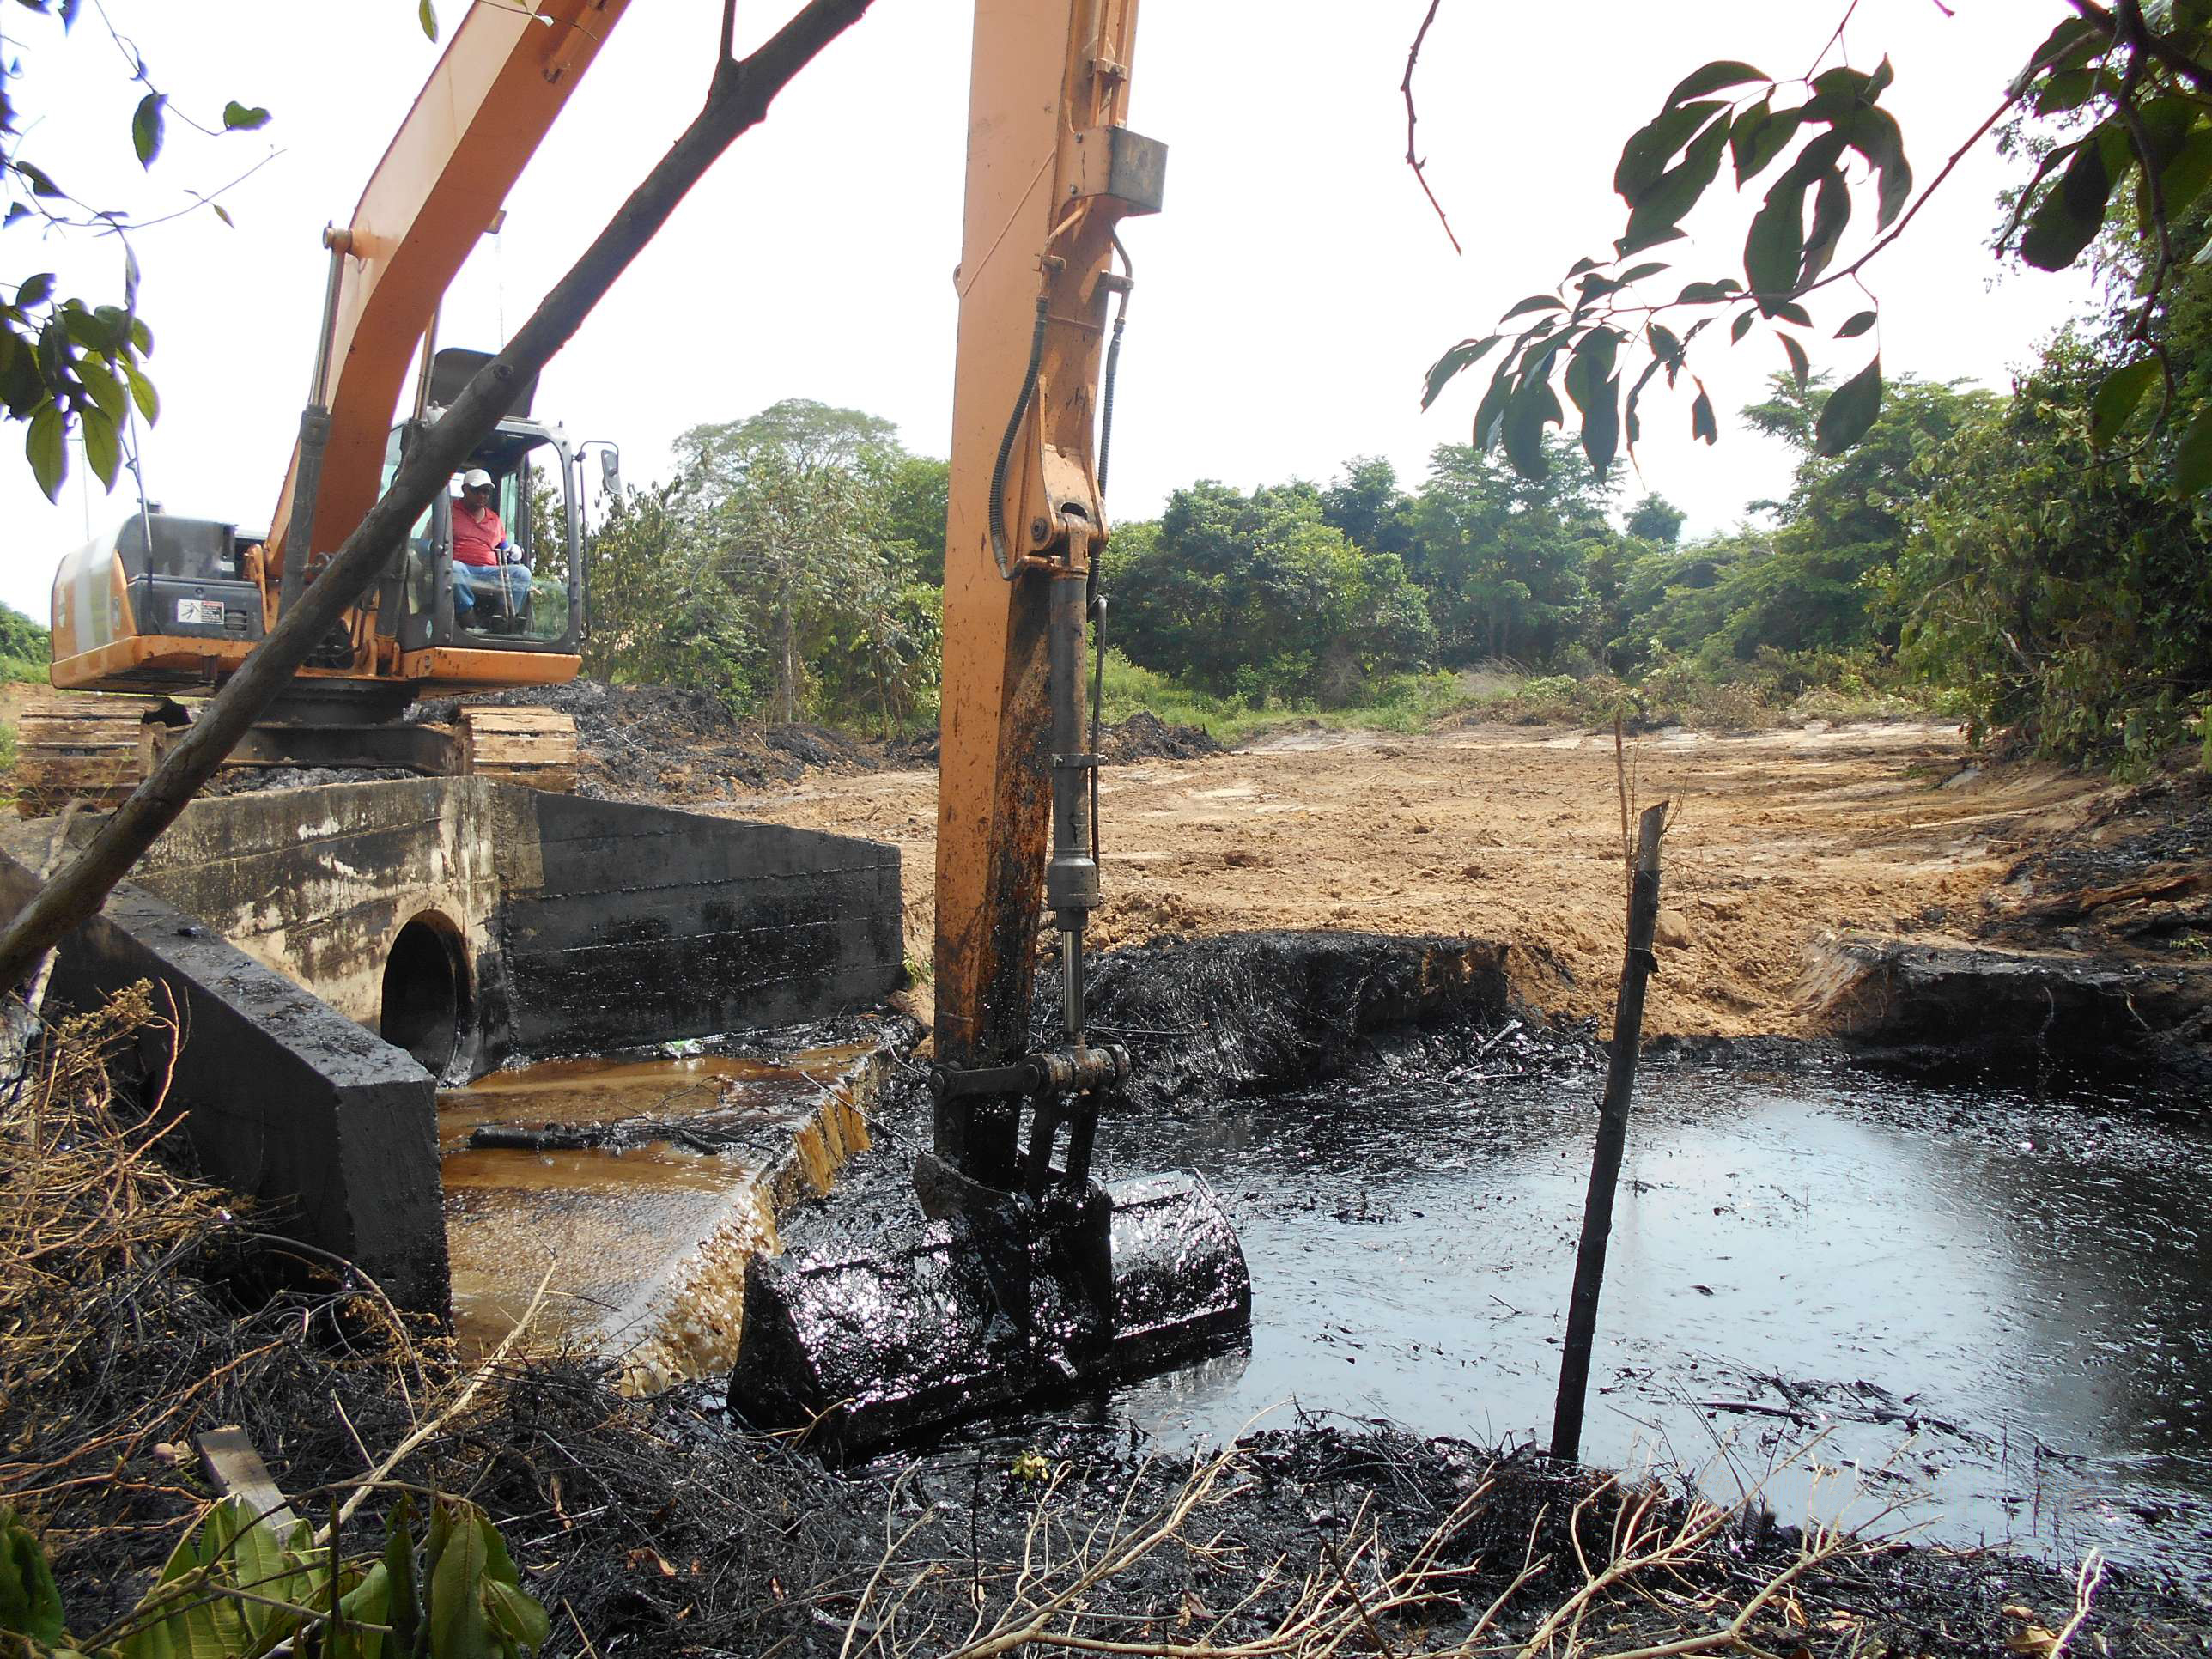 Sanitation, Restoration and final Disposal of Hazardous Waste in Areas Affected by Oil Spills